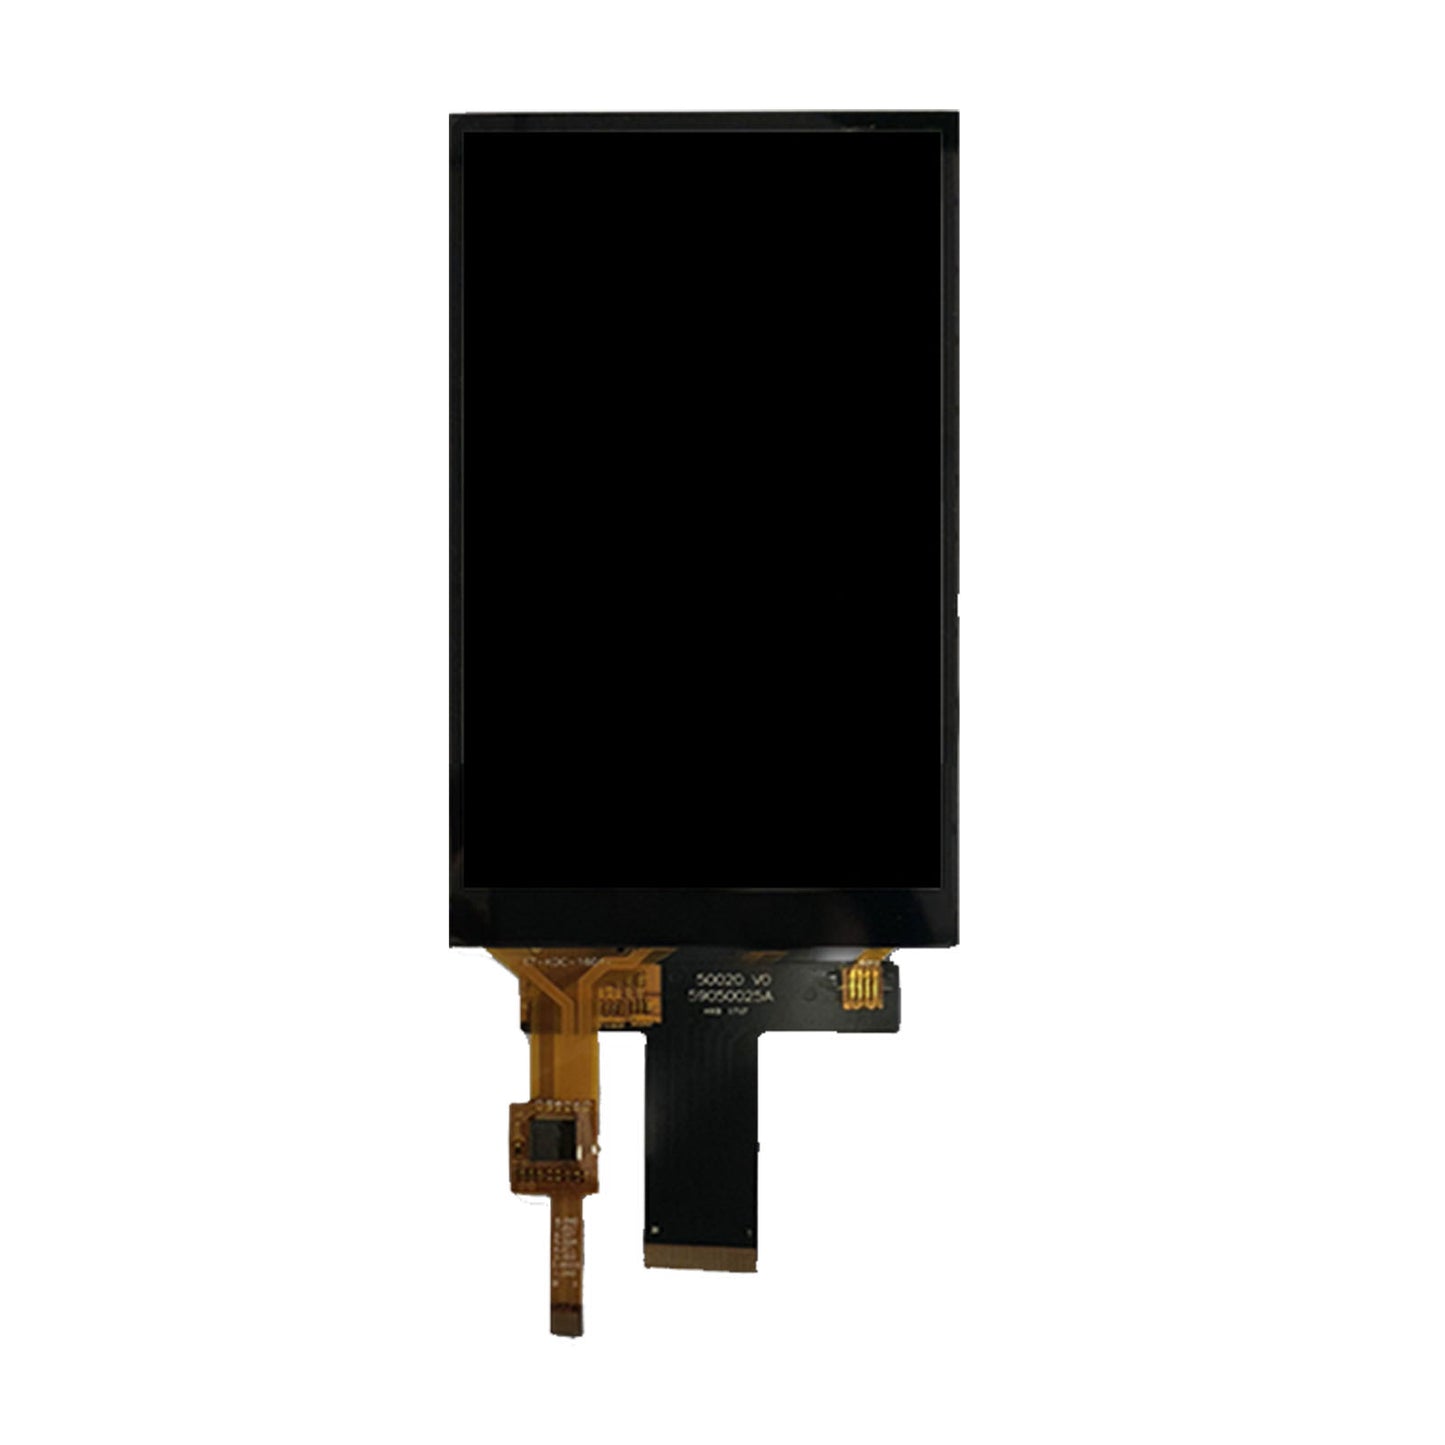 DisplayModule 5" IPS 720x1280 FULL VIEW DISPLAY PANEL WITH CAPACITIVE TOUCH - MIPI